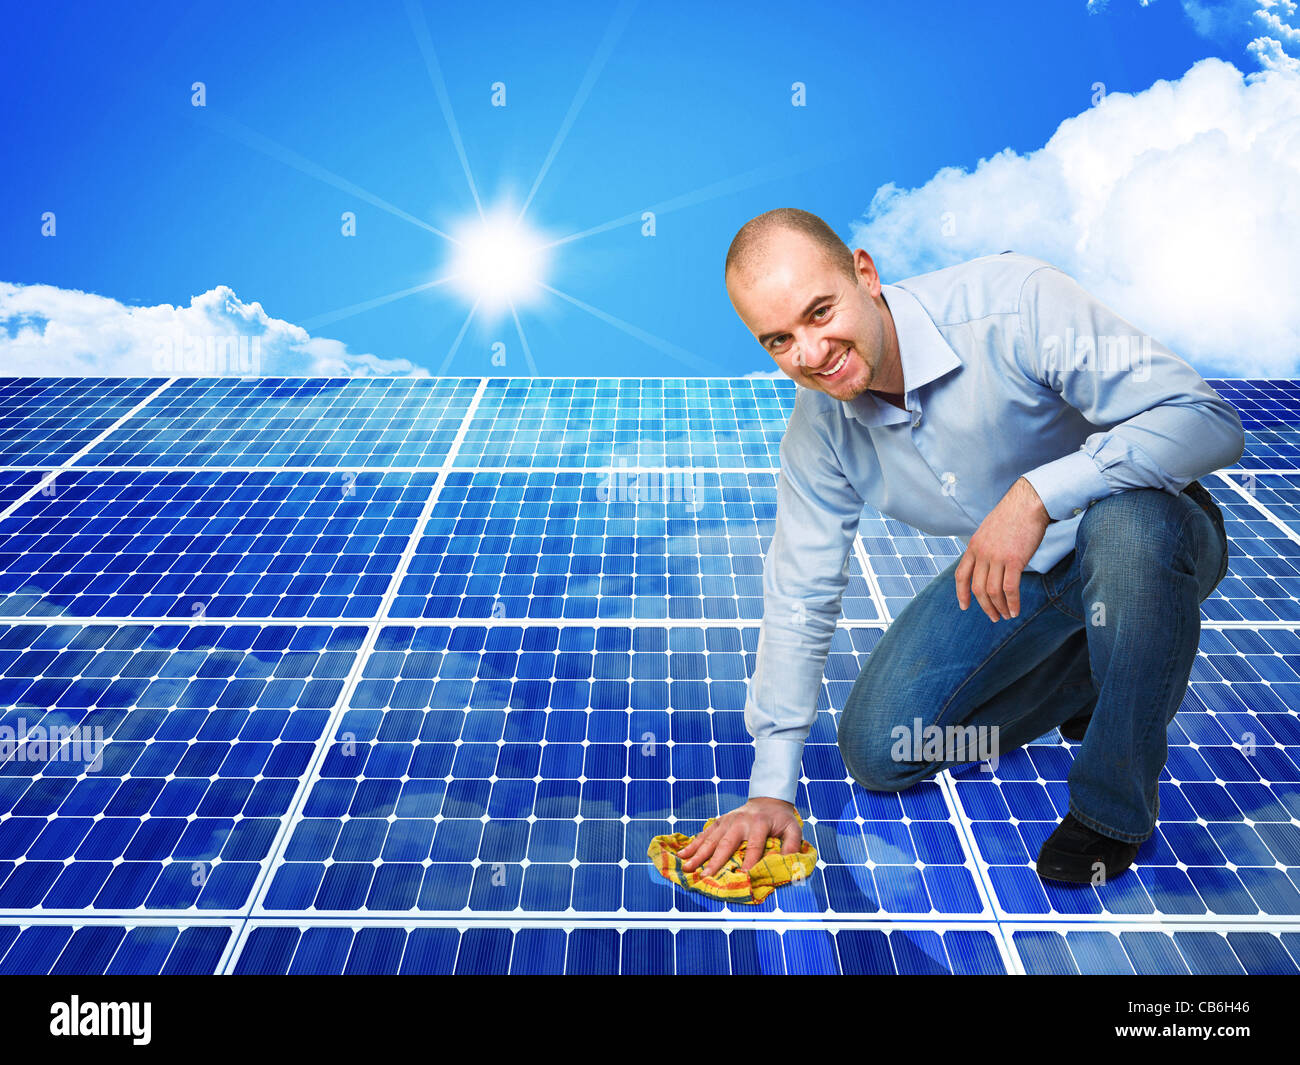 3d image of classic solar panel and smiling cleaner Stock Photo